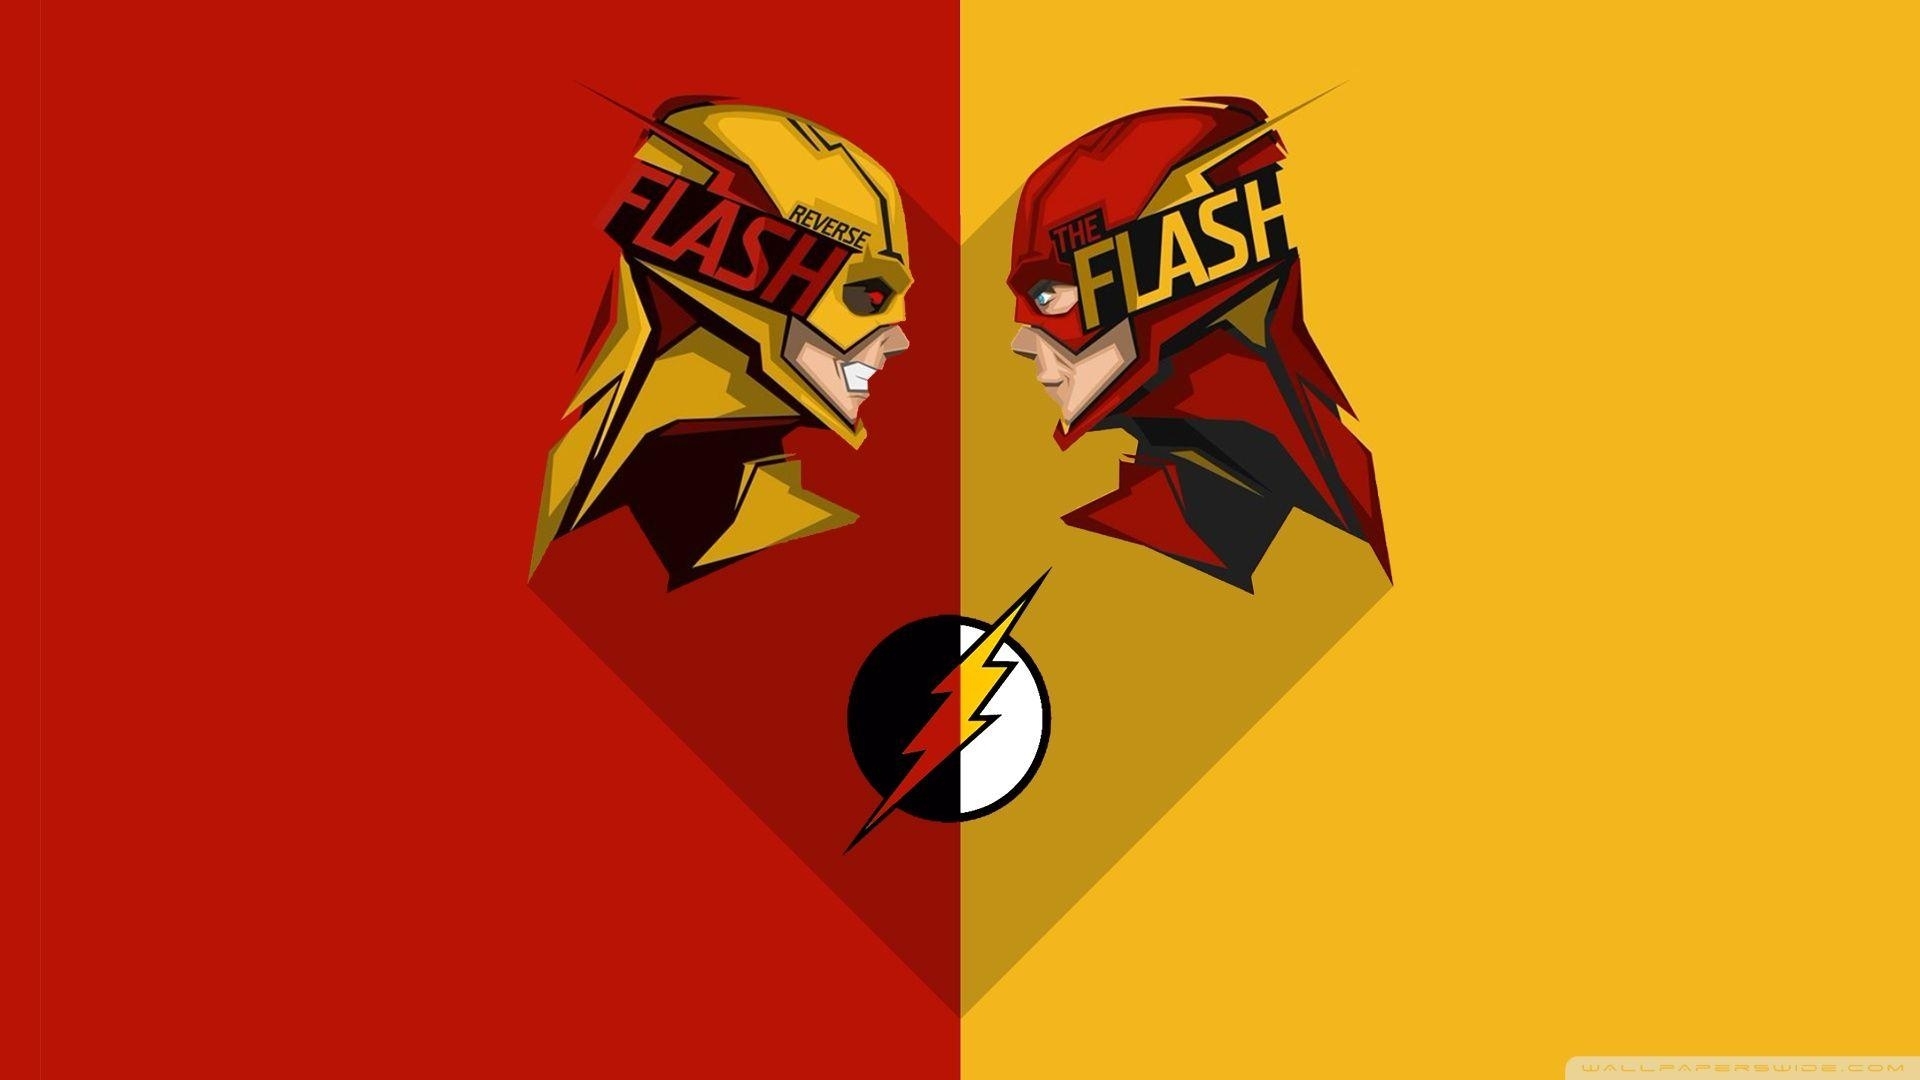 reverse-flash wallpapers - wallpaper cave